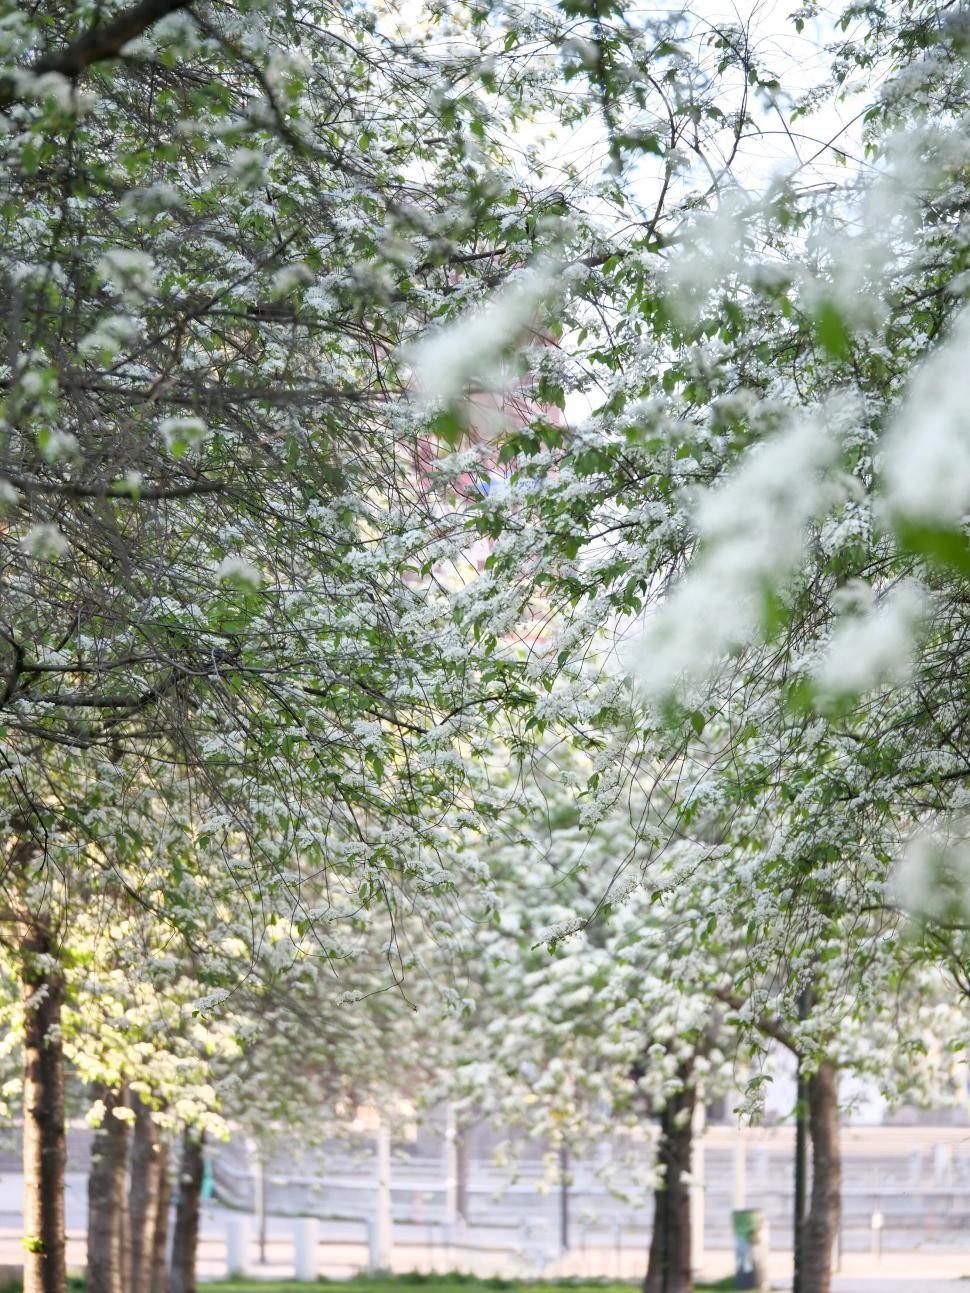 Free Image of Spring blossoms on tree branches in park 